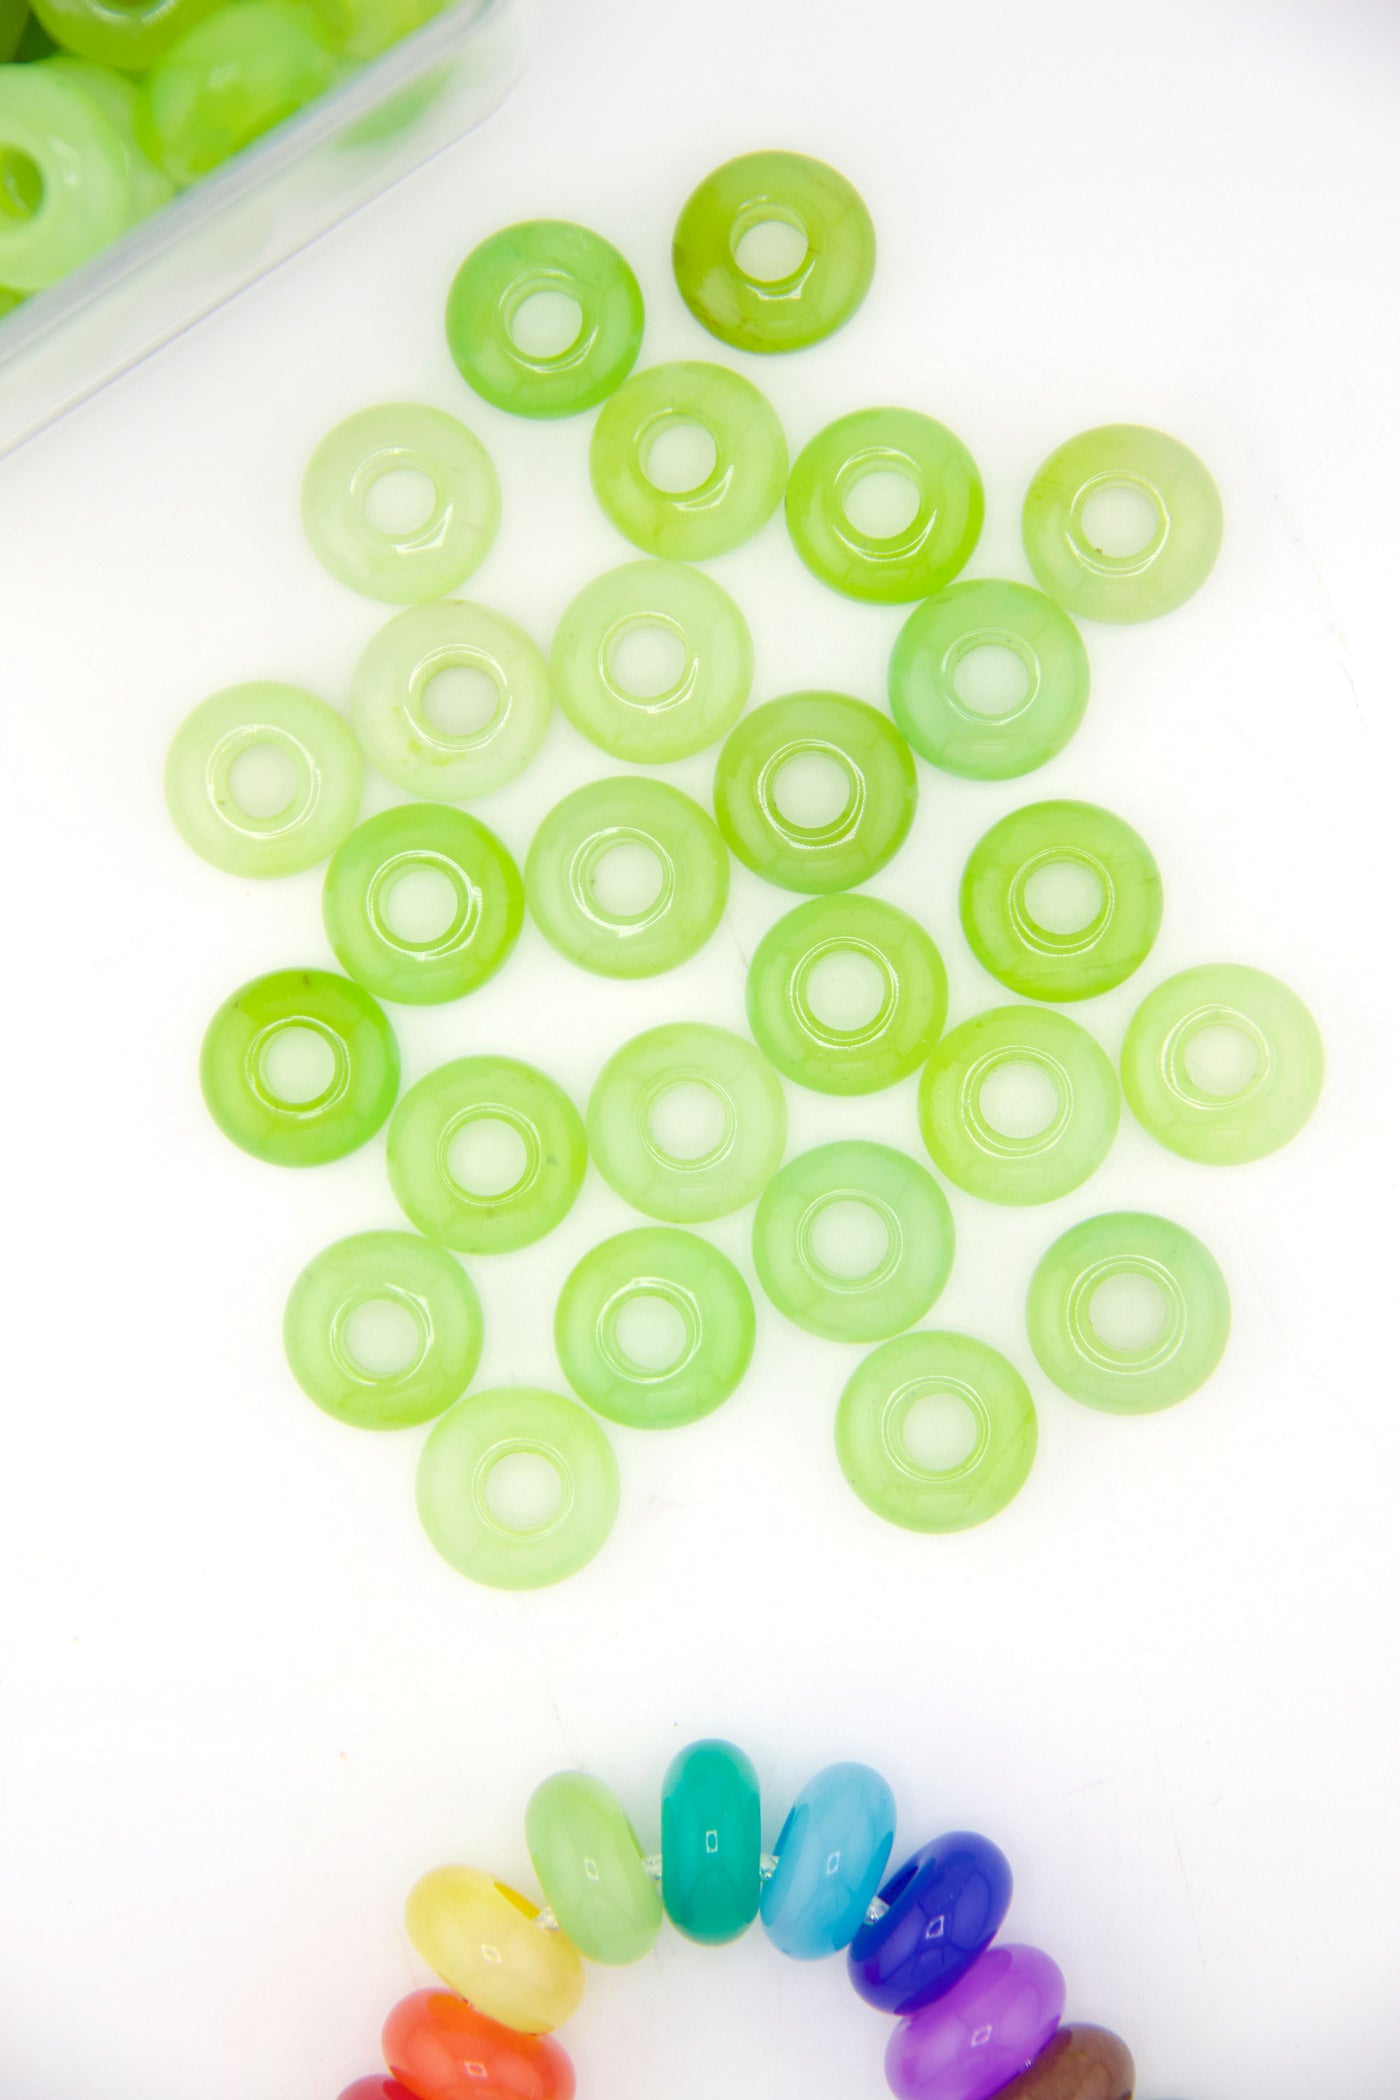 Green Candy Jade Large Hole Euro Beads, Slider Beads, 15mm, 5mm Hole